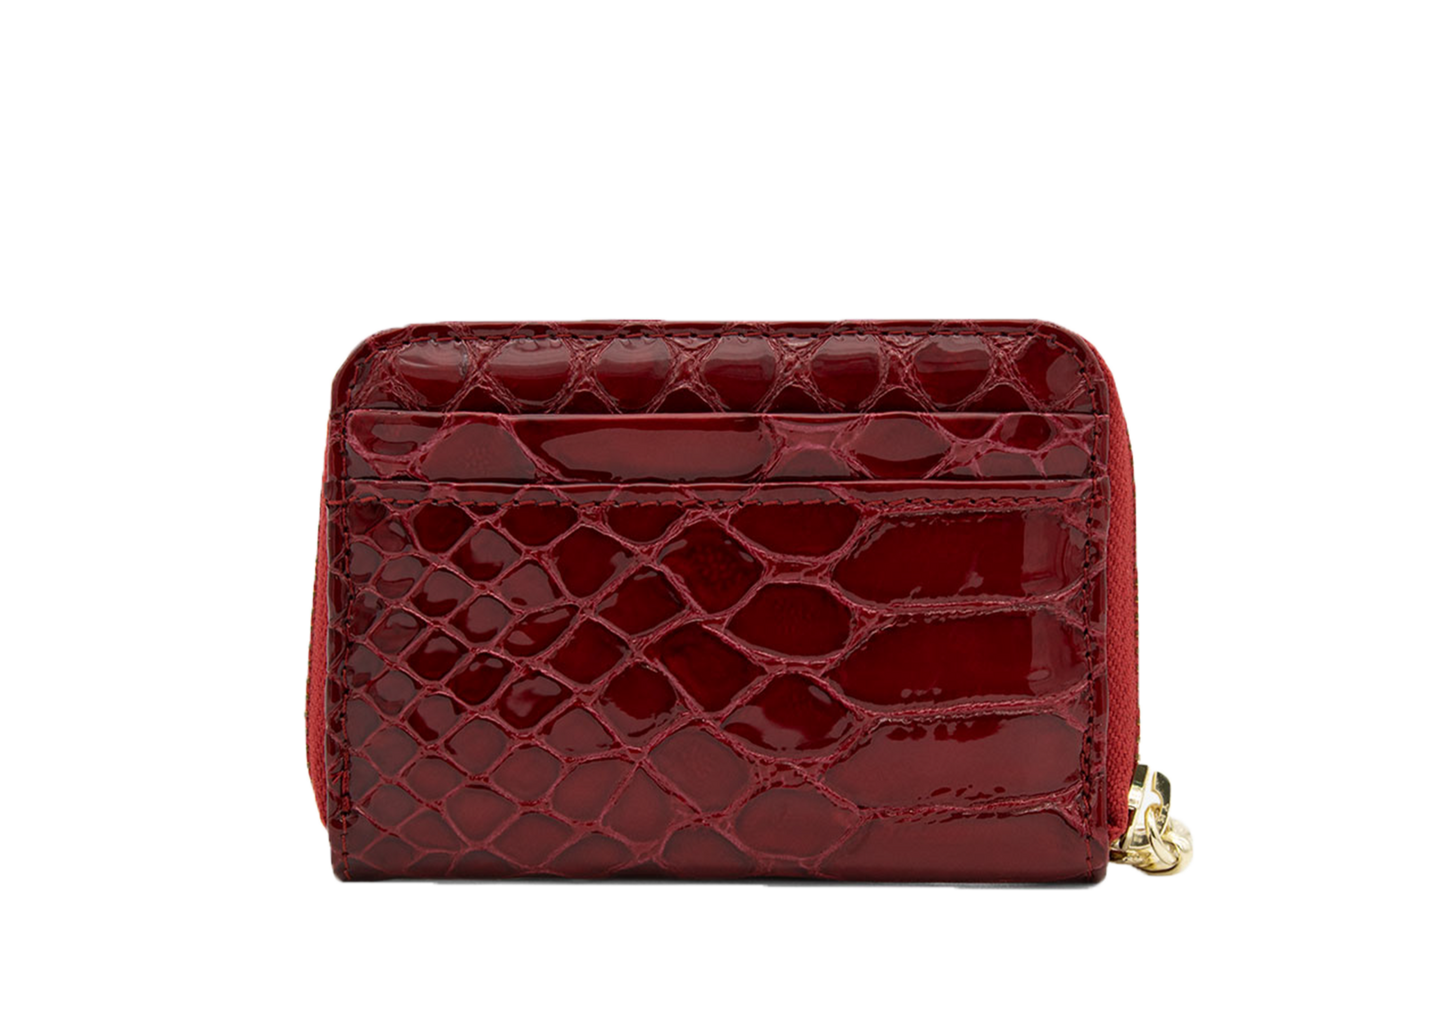 Cavalinho Gallop Patent Leather Card Holder - Red - Galope_2Asset1